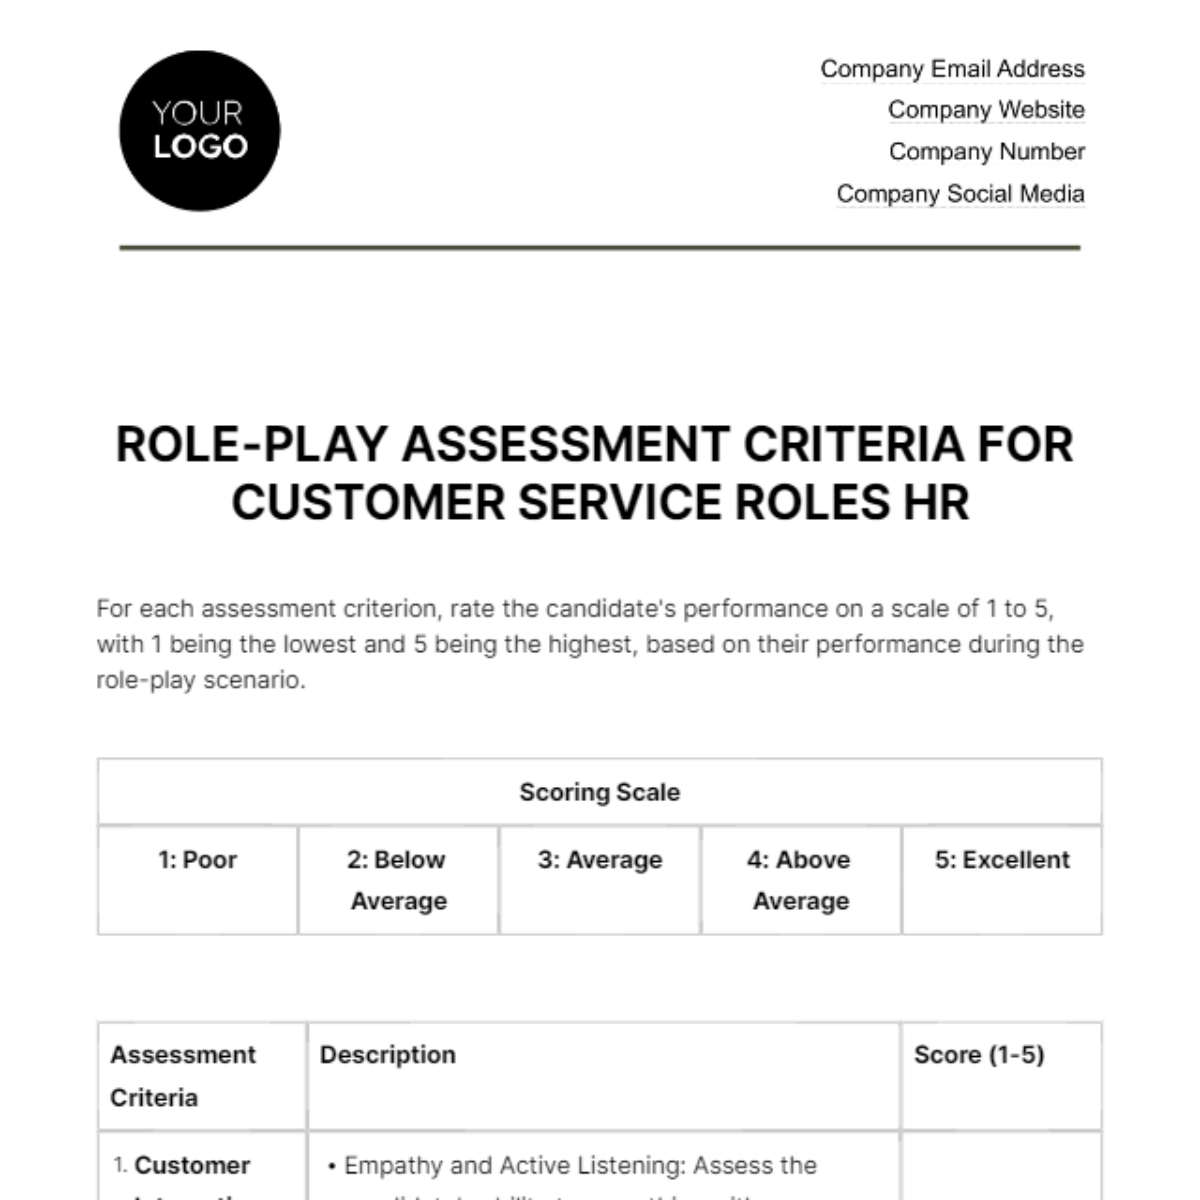 Free Role-play Assessment Criteria for Customer Service Roles HR Template